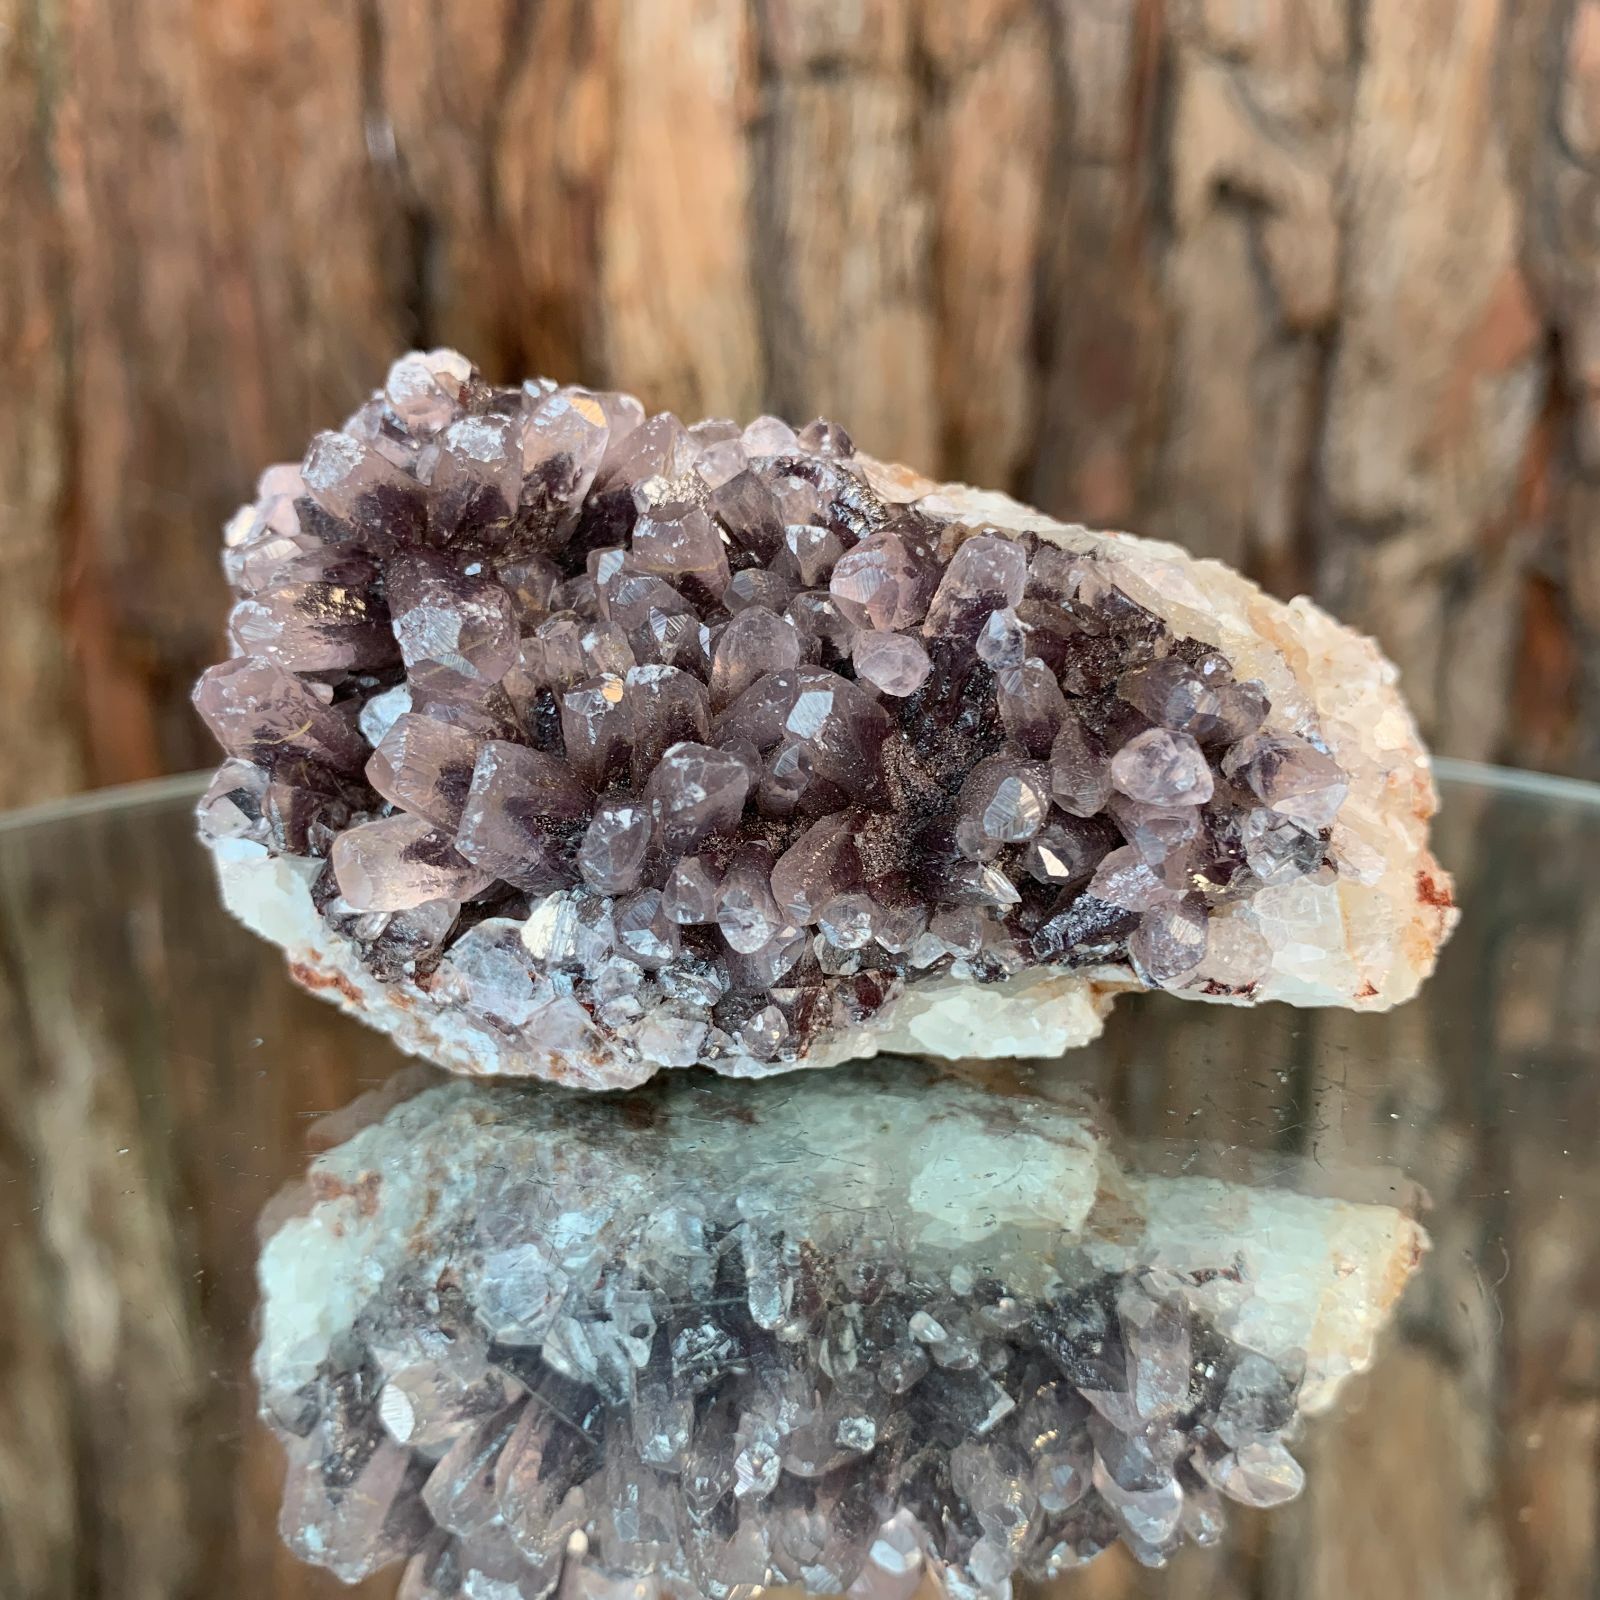 7.5cm 112g Purple Cobalto Calcite Crystal Mineral Rock from Morocco